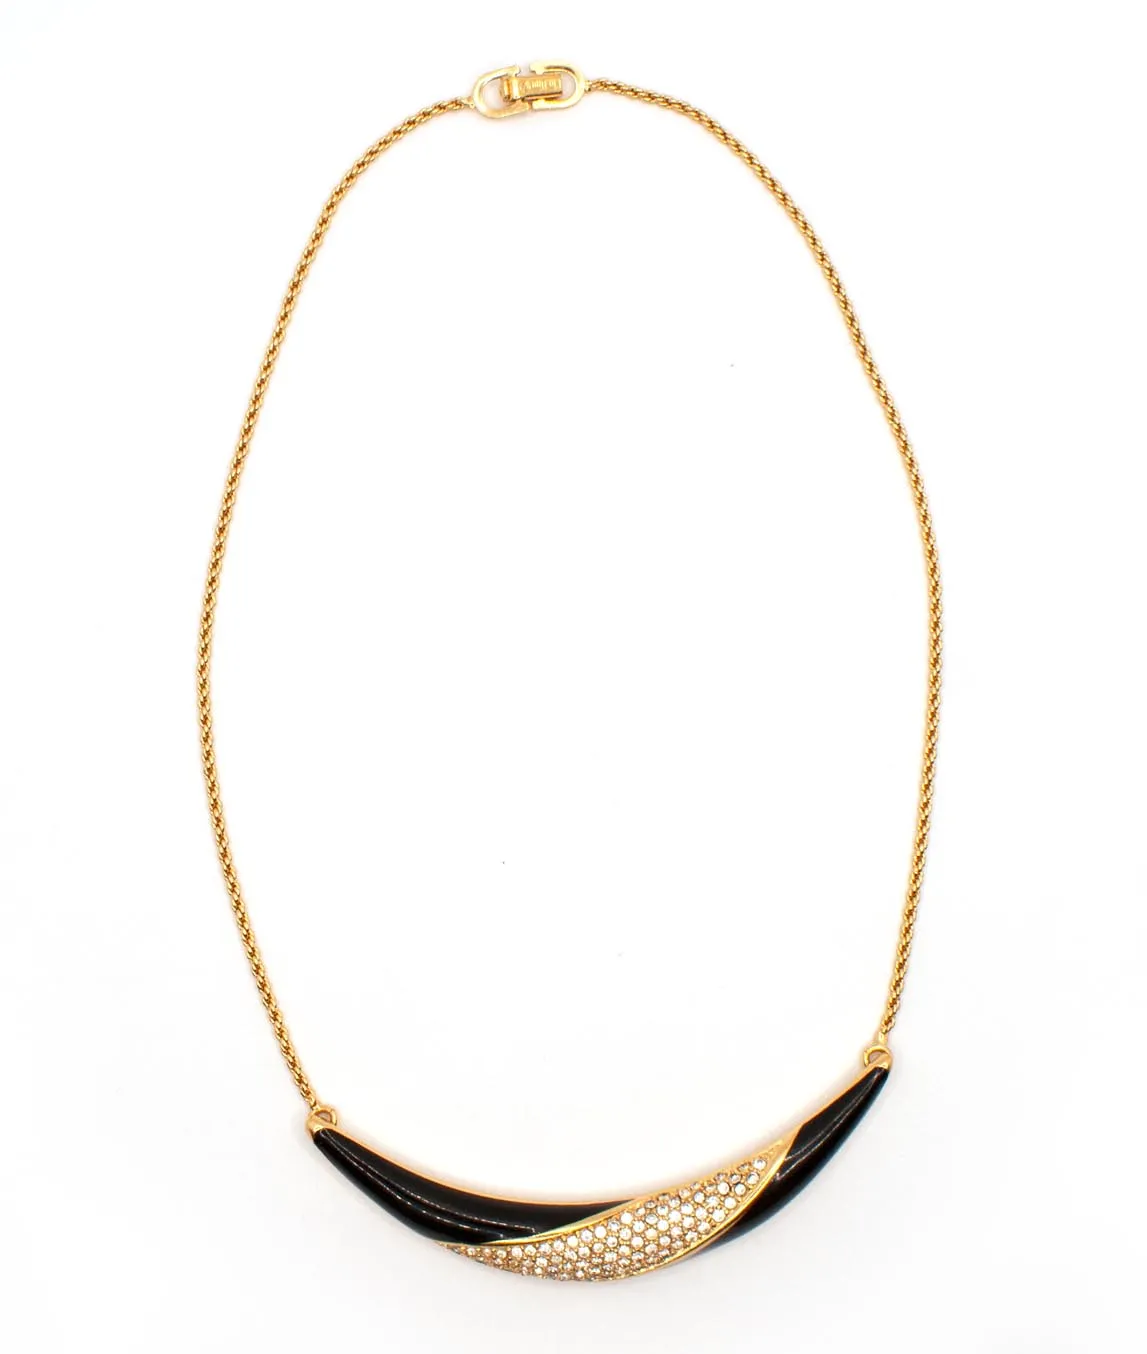 Black enamel and rhinestone necklace from Christian Dior